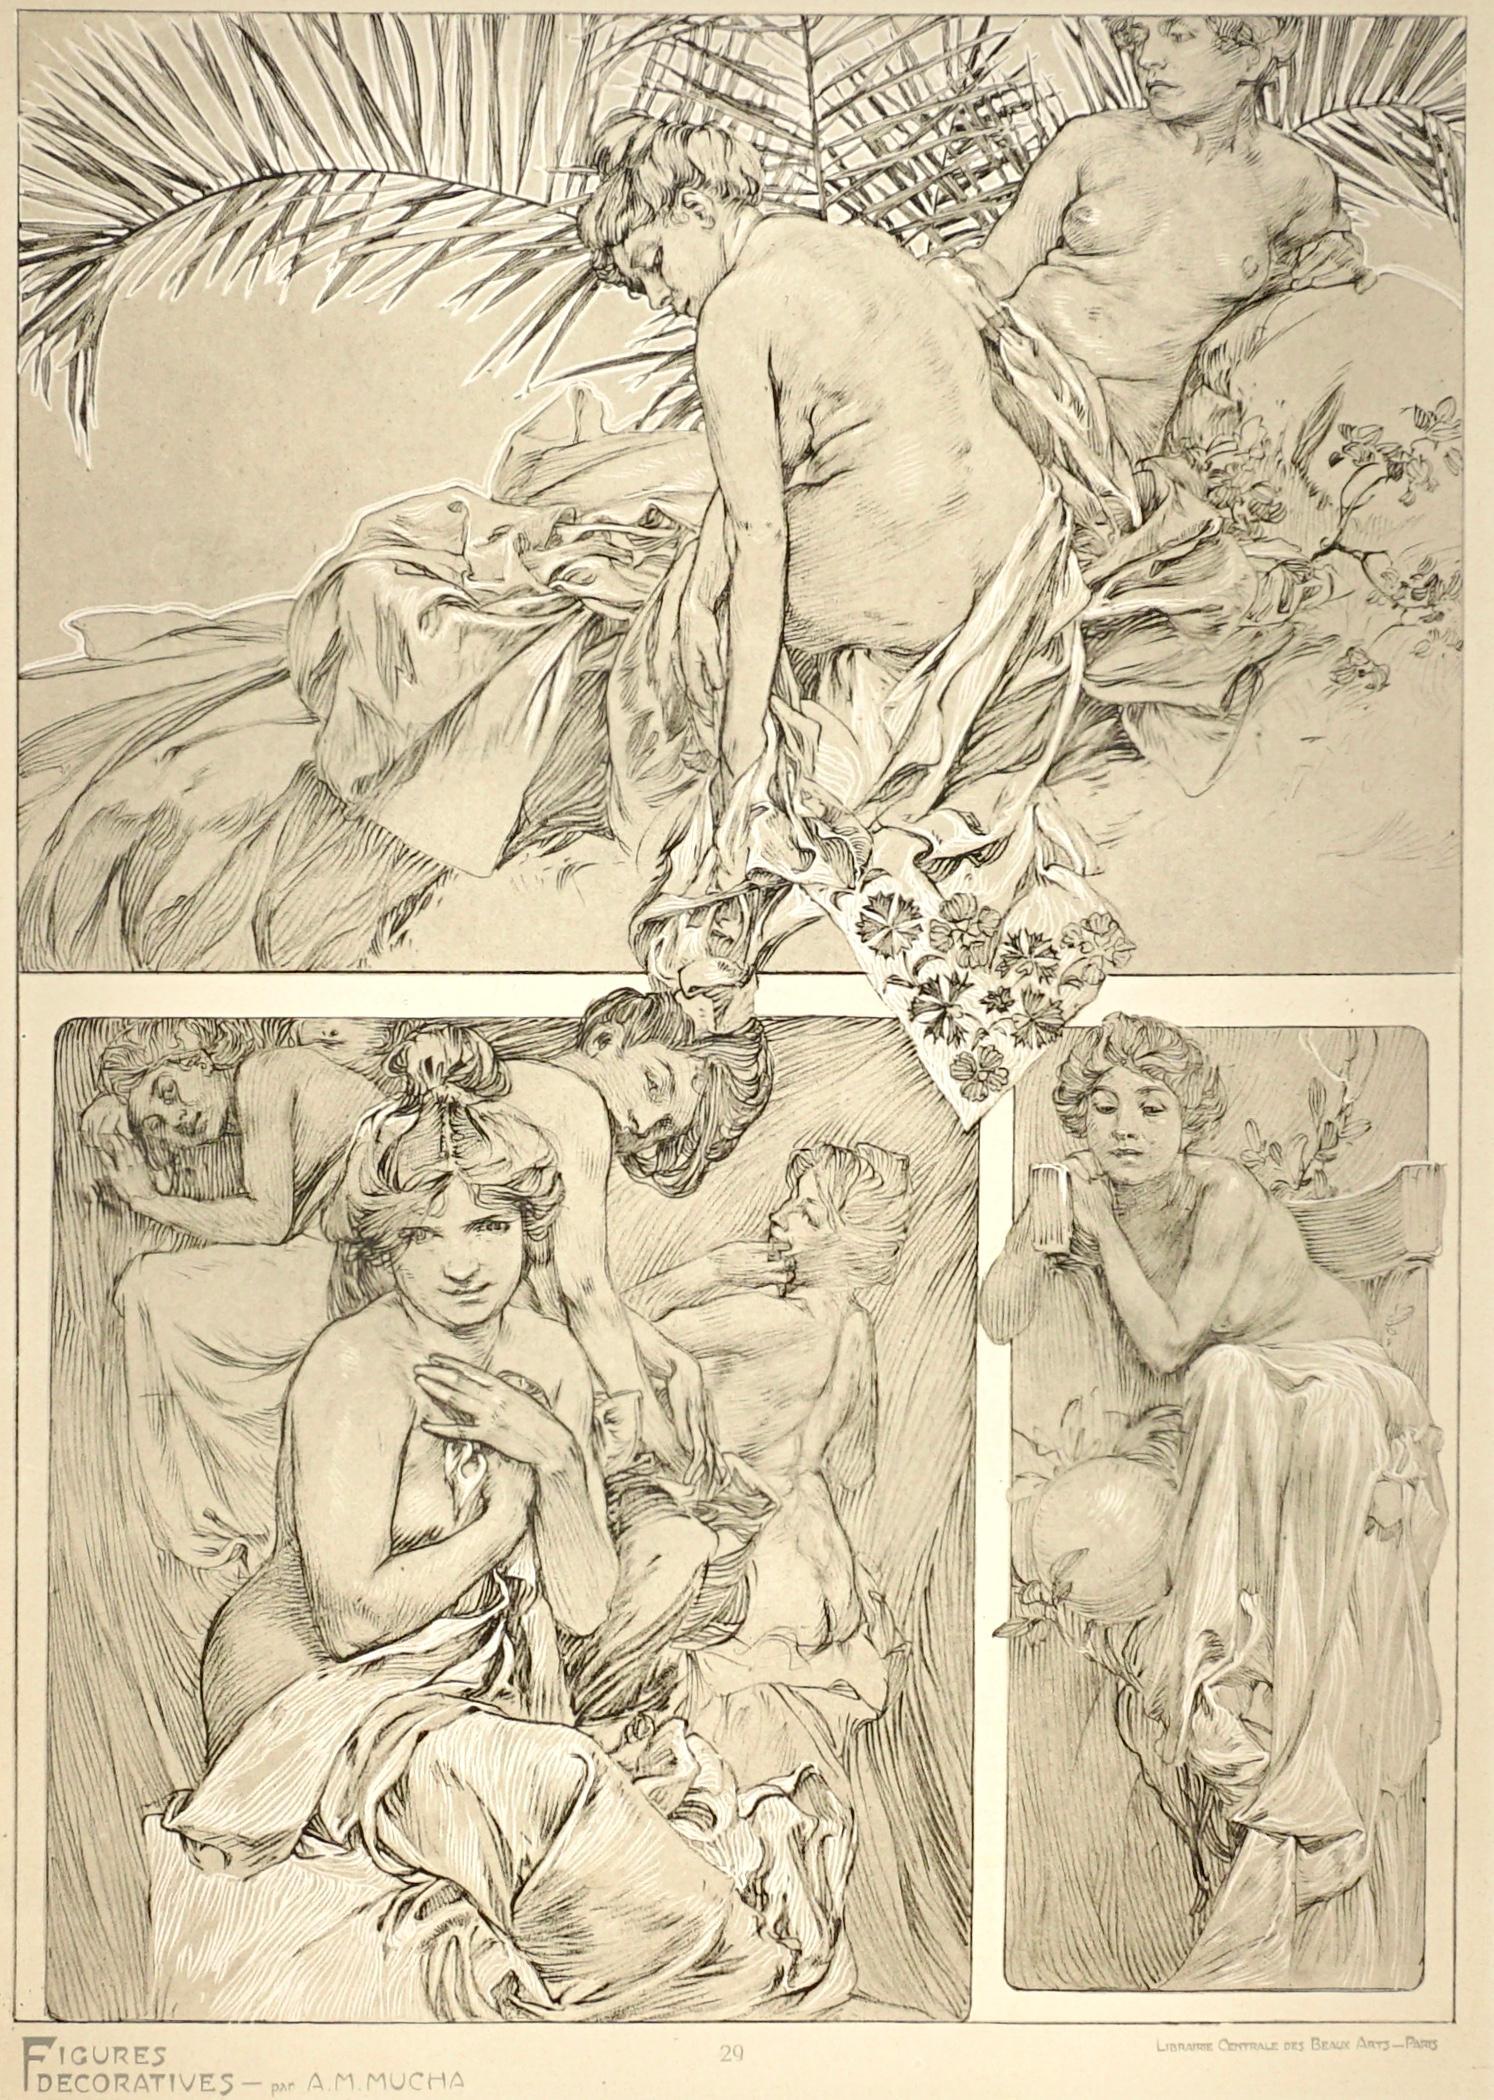 Alphonse Mucha Figures Decoratives Poster Plate 29 For Sale 2